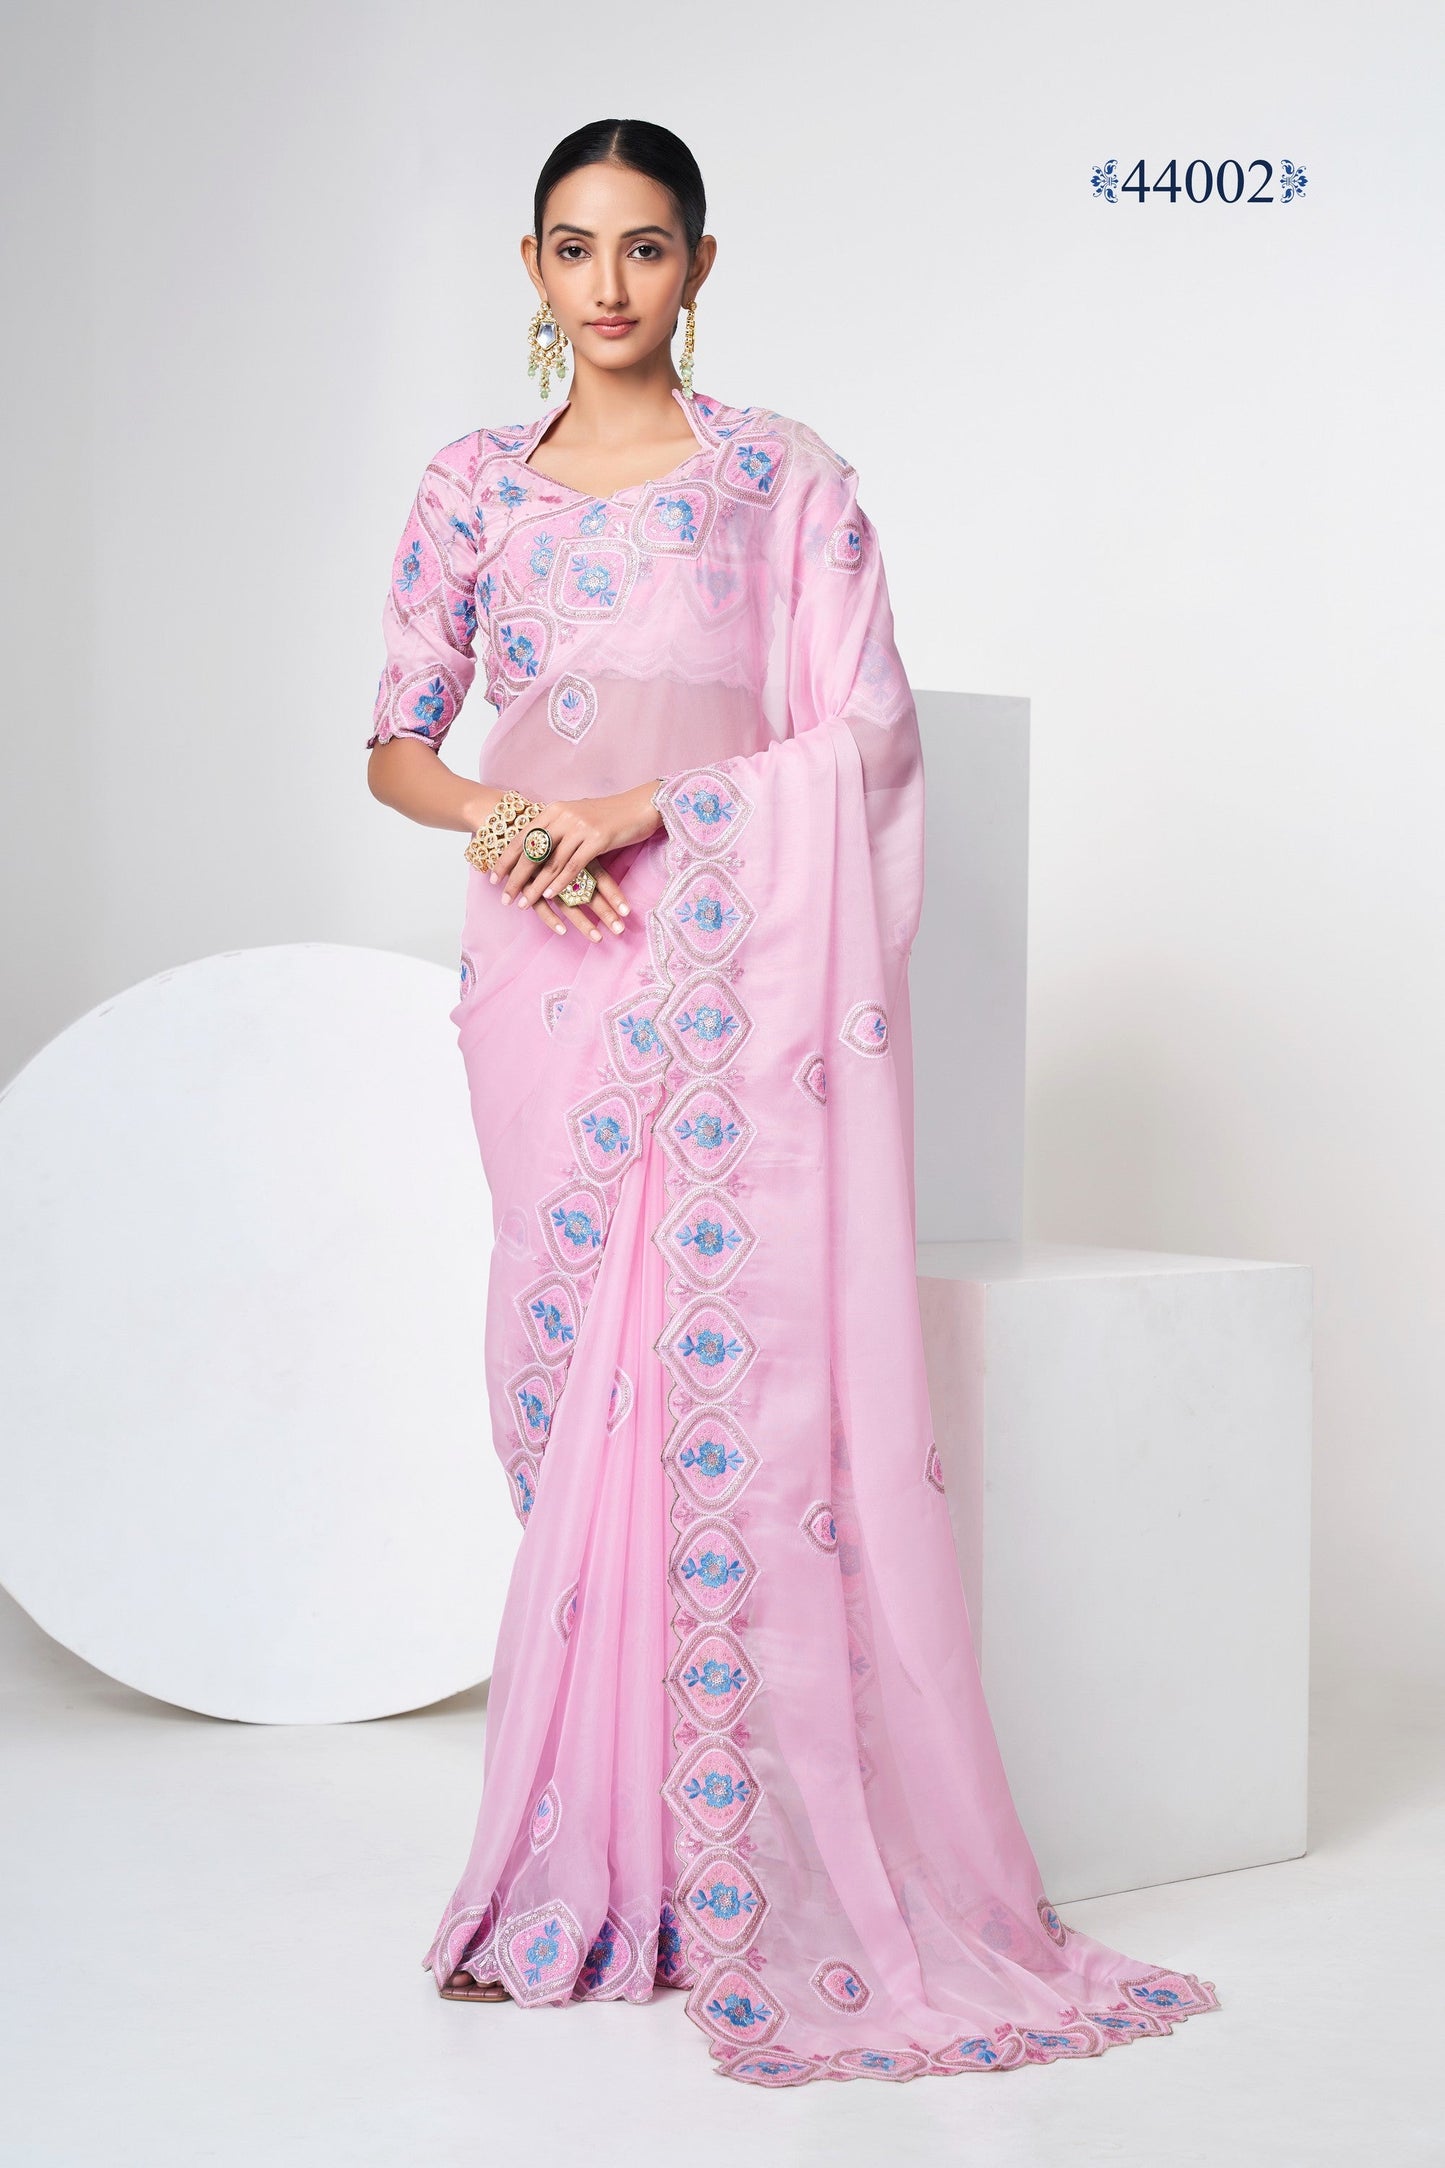 Baby Pink Indian Organza Saree For Indian Festivals & Weddings - Sequence Embroidery Work, Thread Embroidery Work,